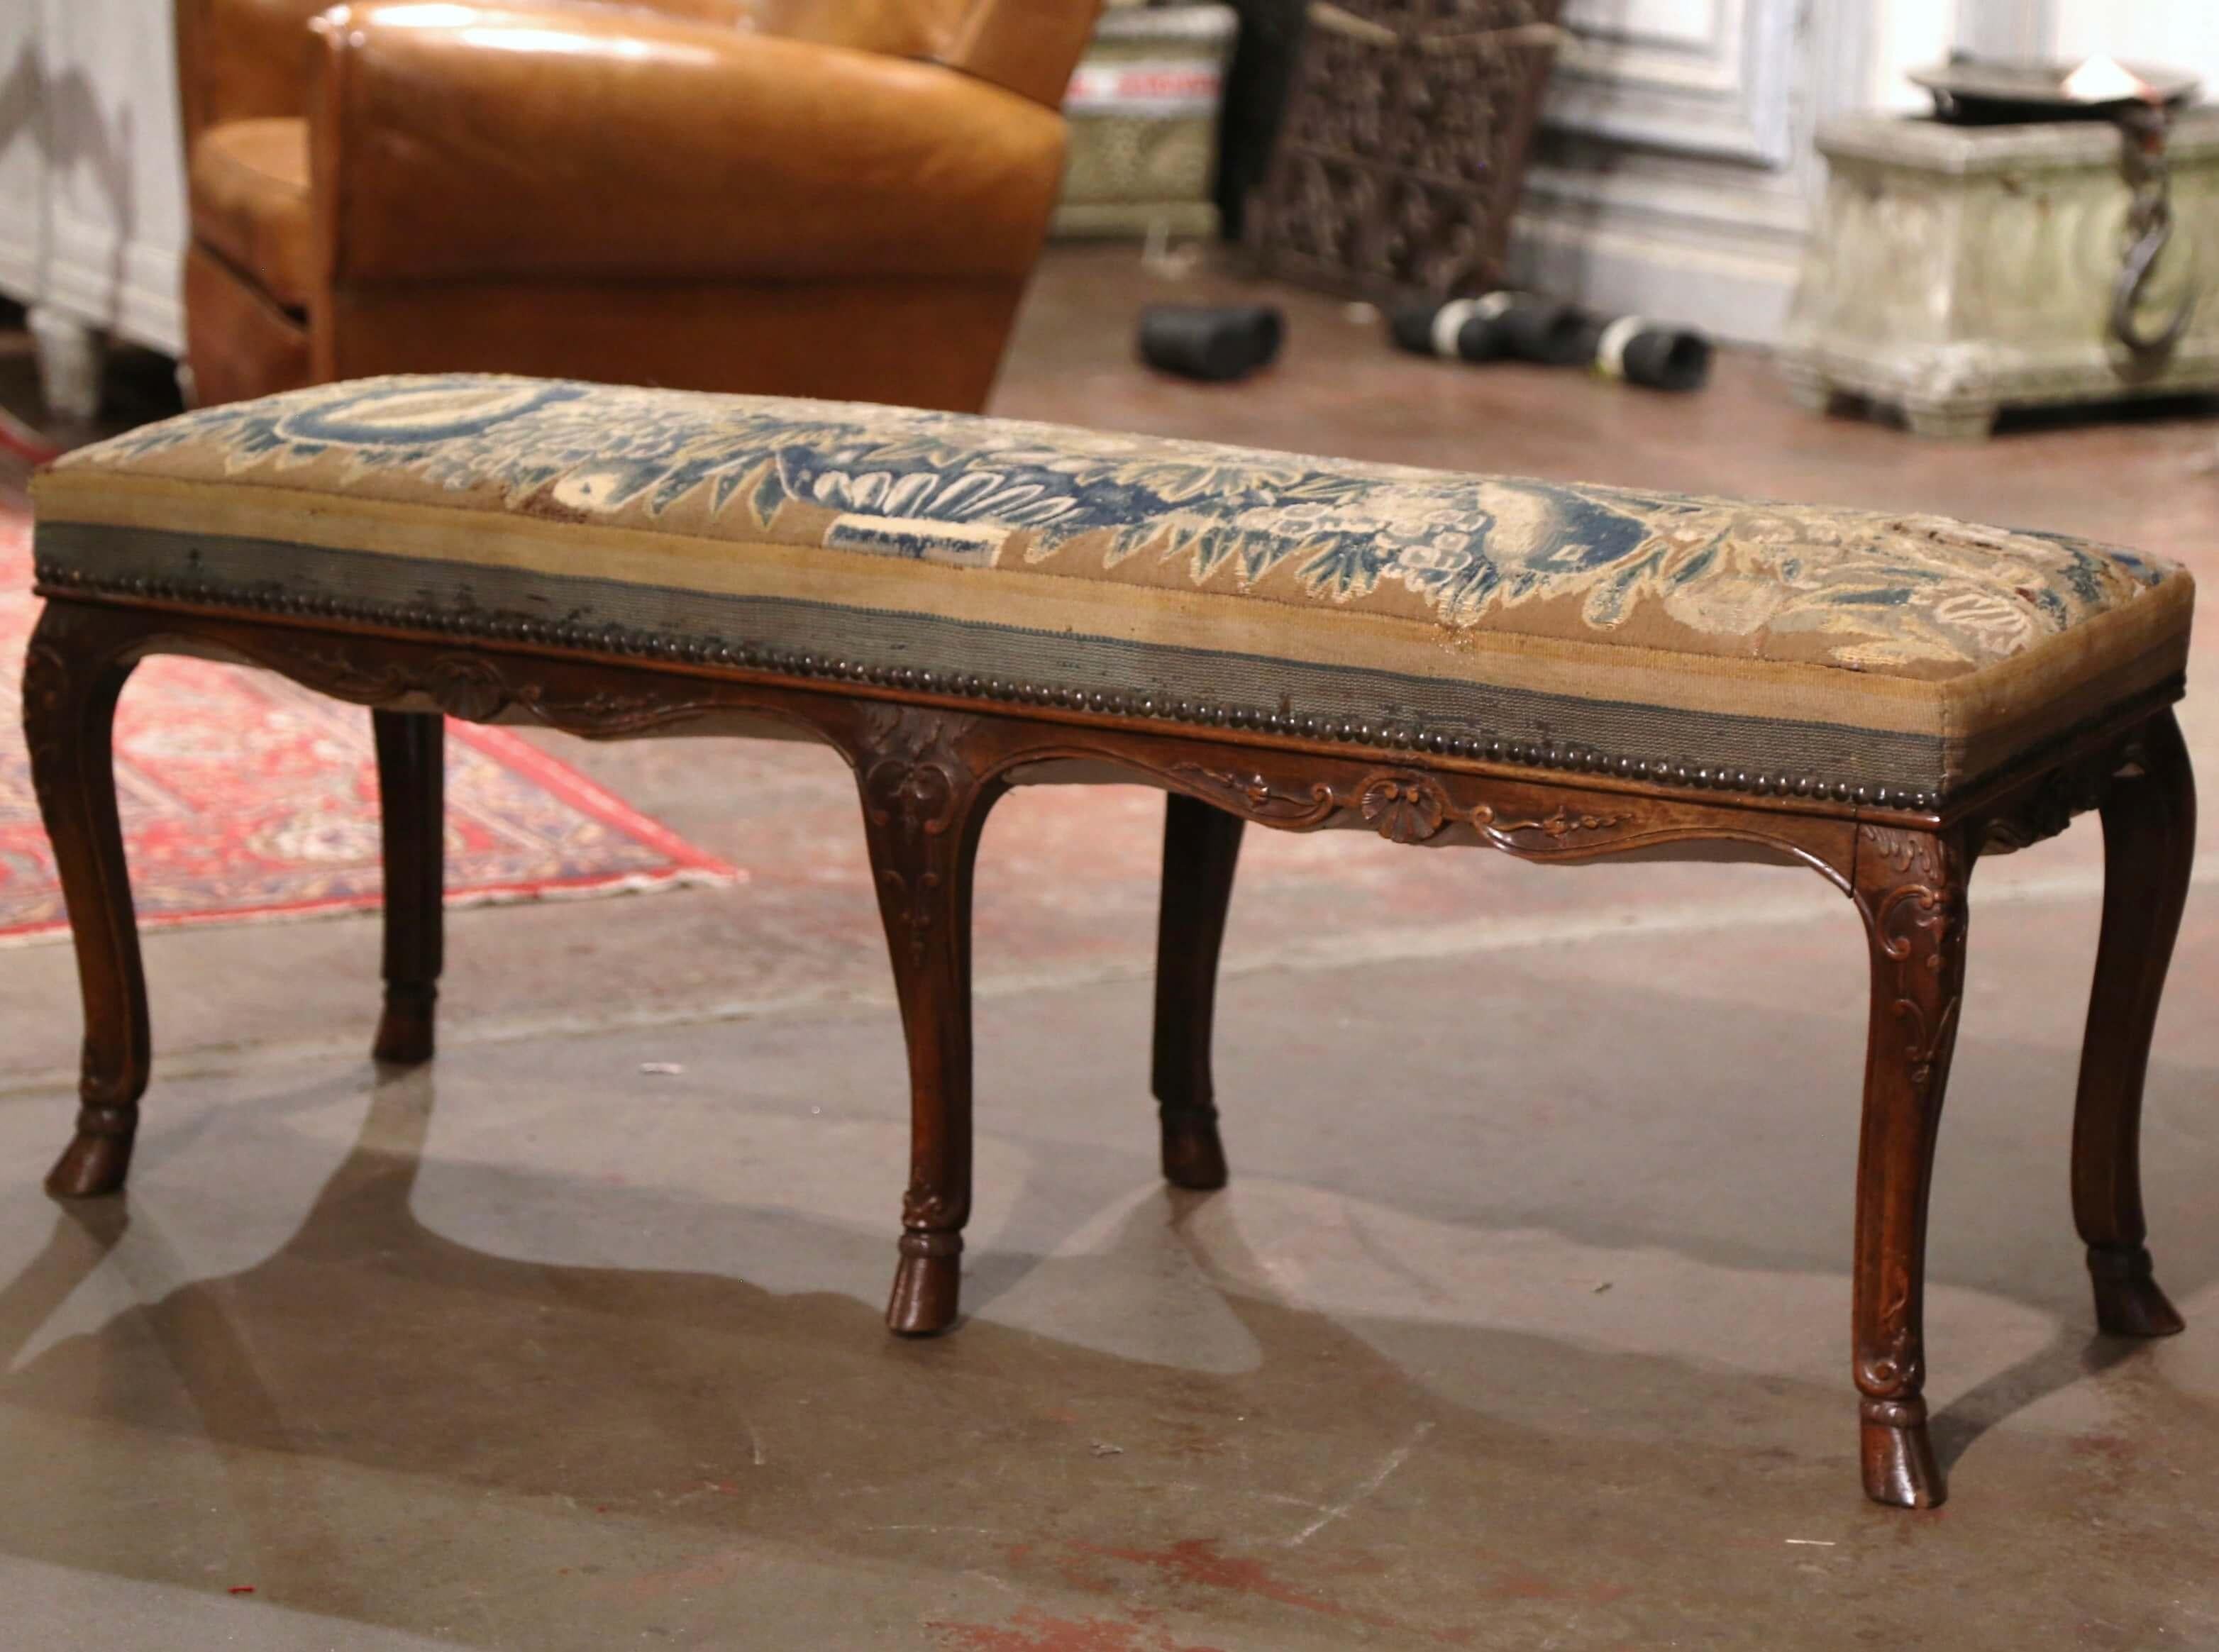 Place this elegant antique bench at the foot of your bed, or use it for extra seating. Crafted in Provence, France circa 1780, and built of walnut, the fruit wood bench stands on six cabriole legs ending with hoof feet, and decorated with delicate